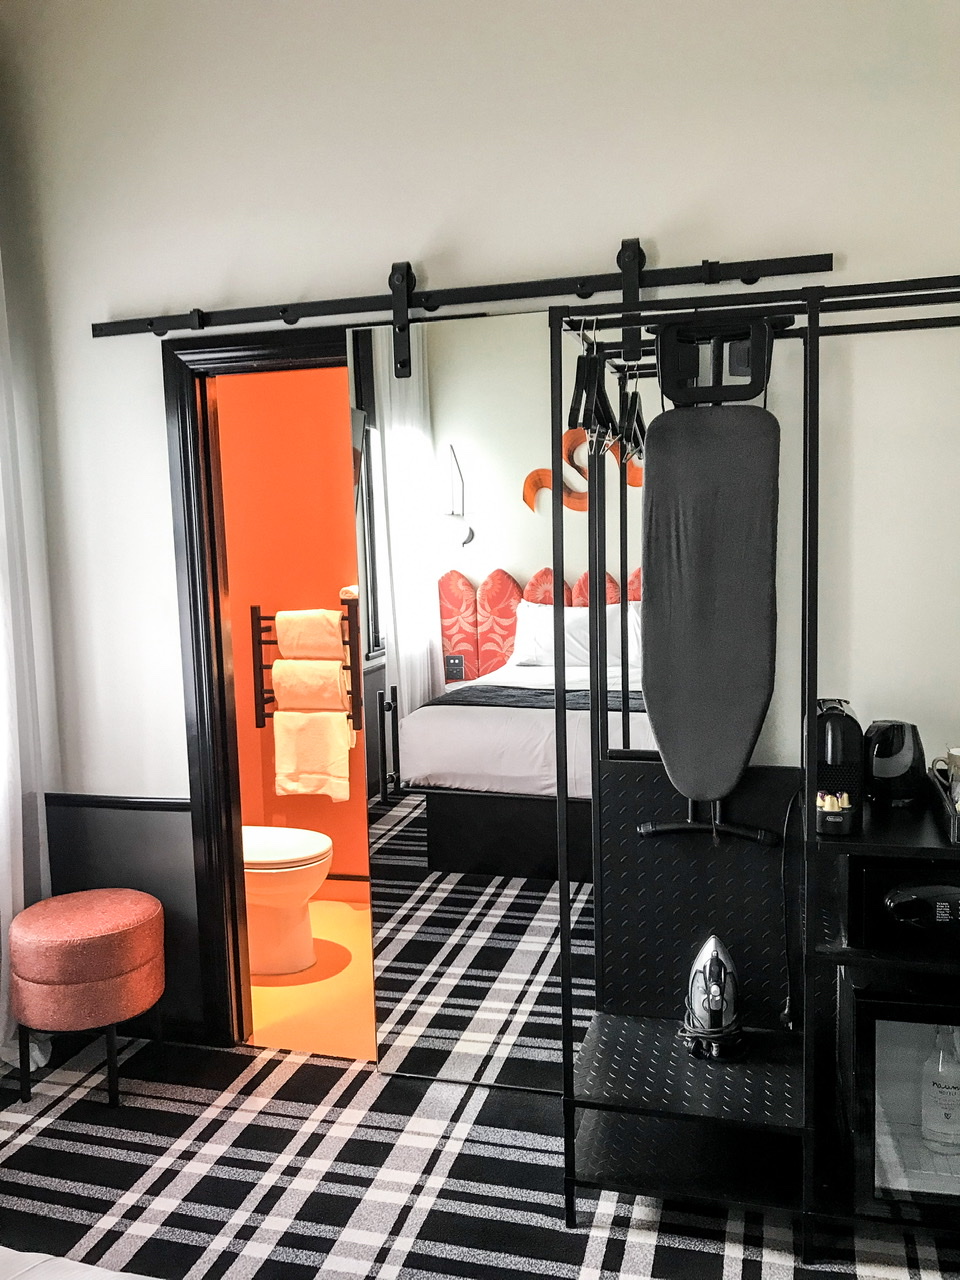 Toilet and three white towels visible in orange painted bathroom behind ajar sliding door with hotel bed visible in mirror on sliding door. Black and white tartan carpet.